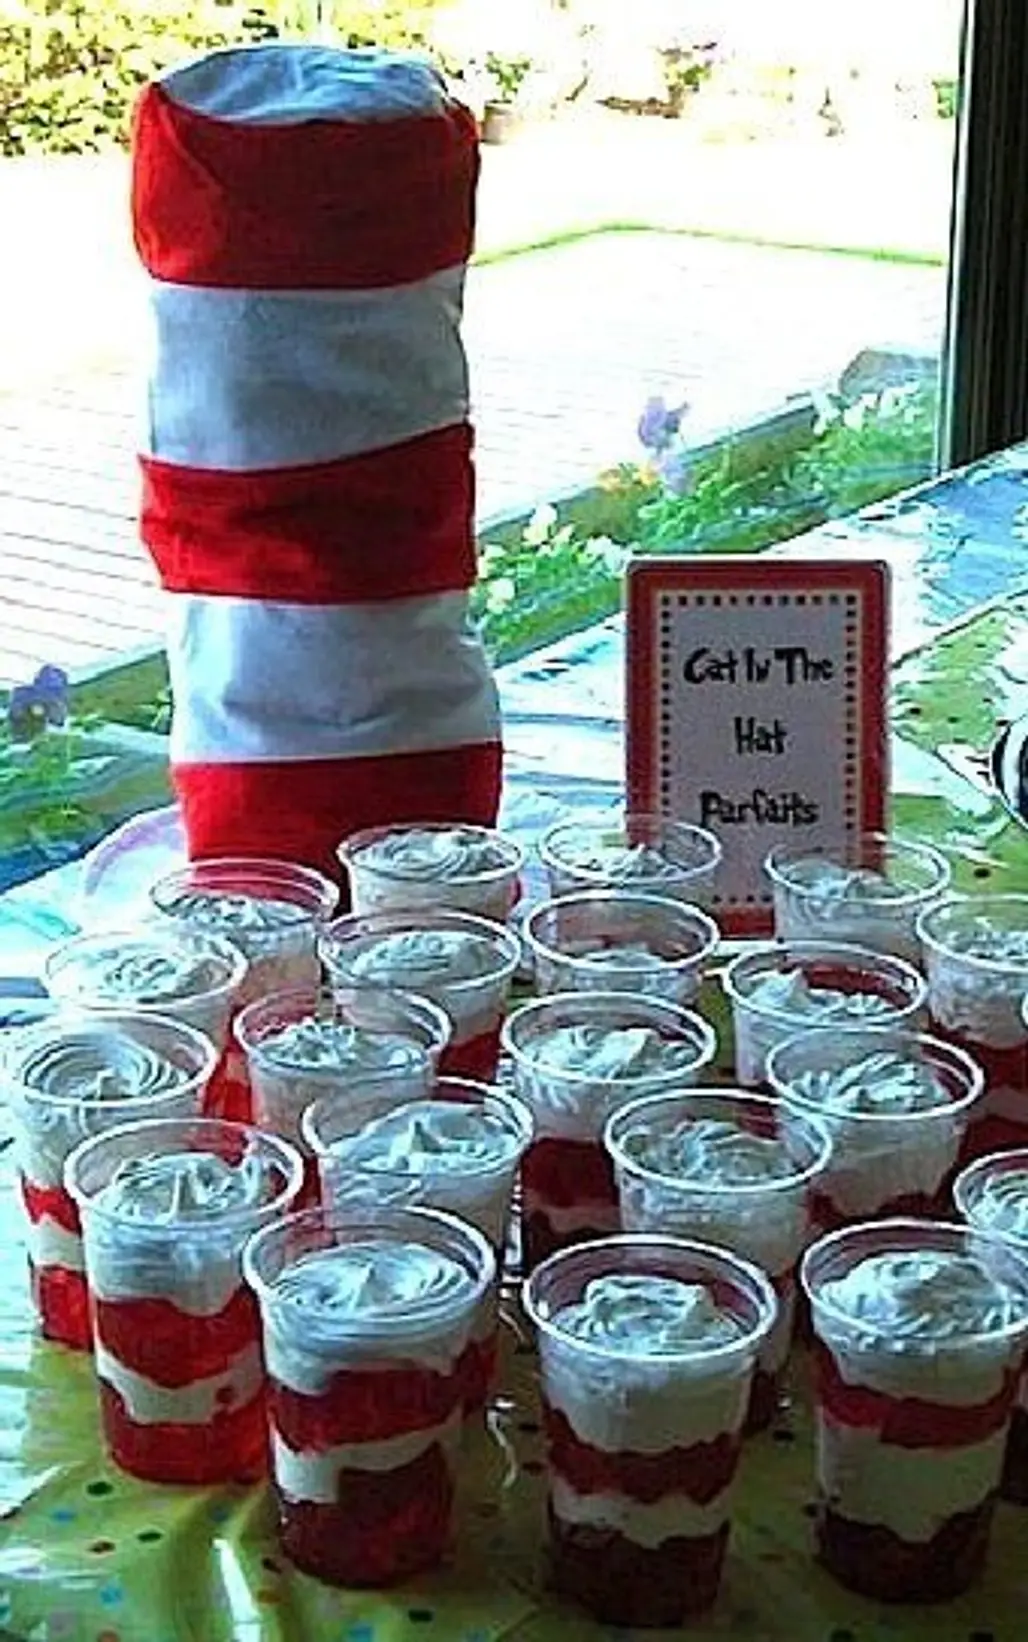 Cat in the Hat Layered Parfaits